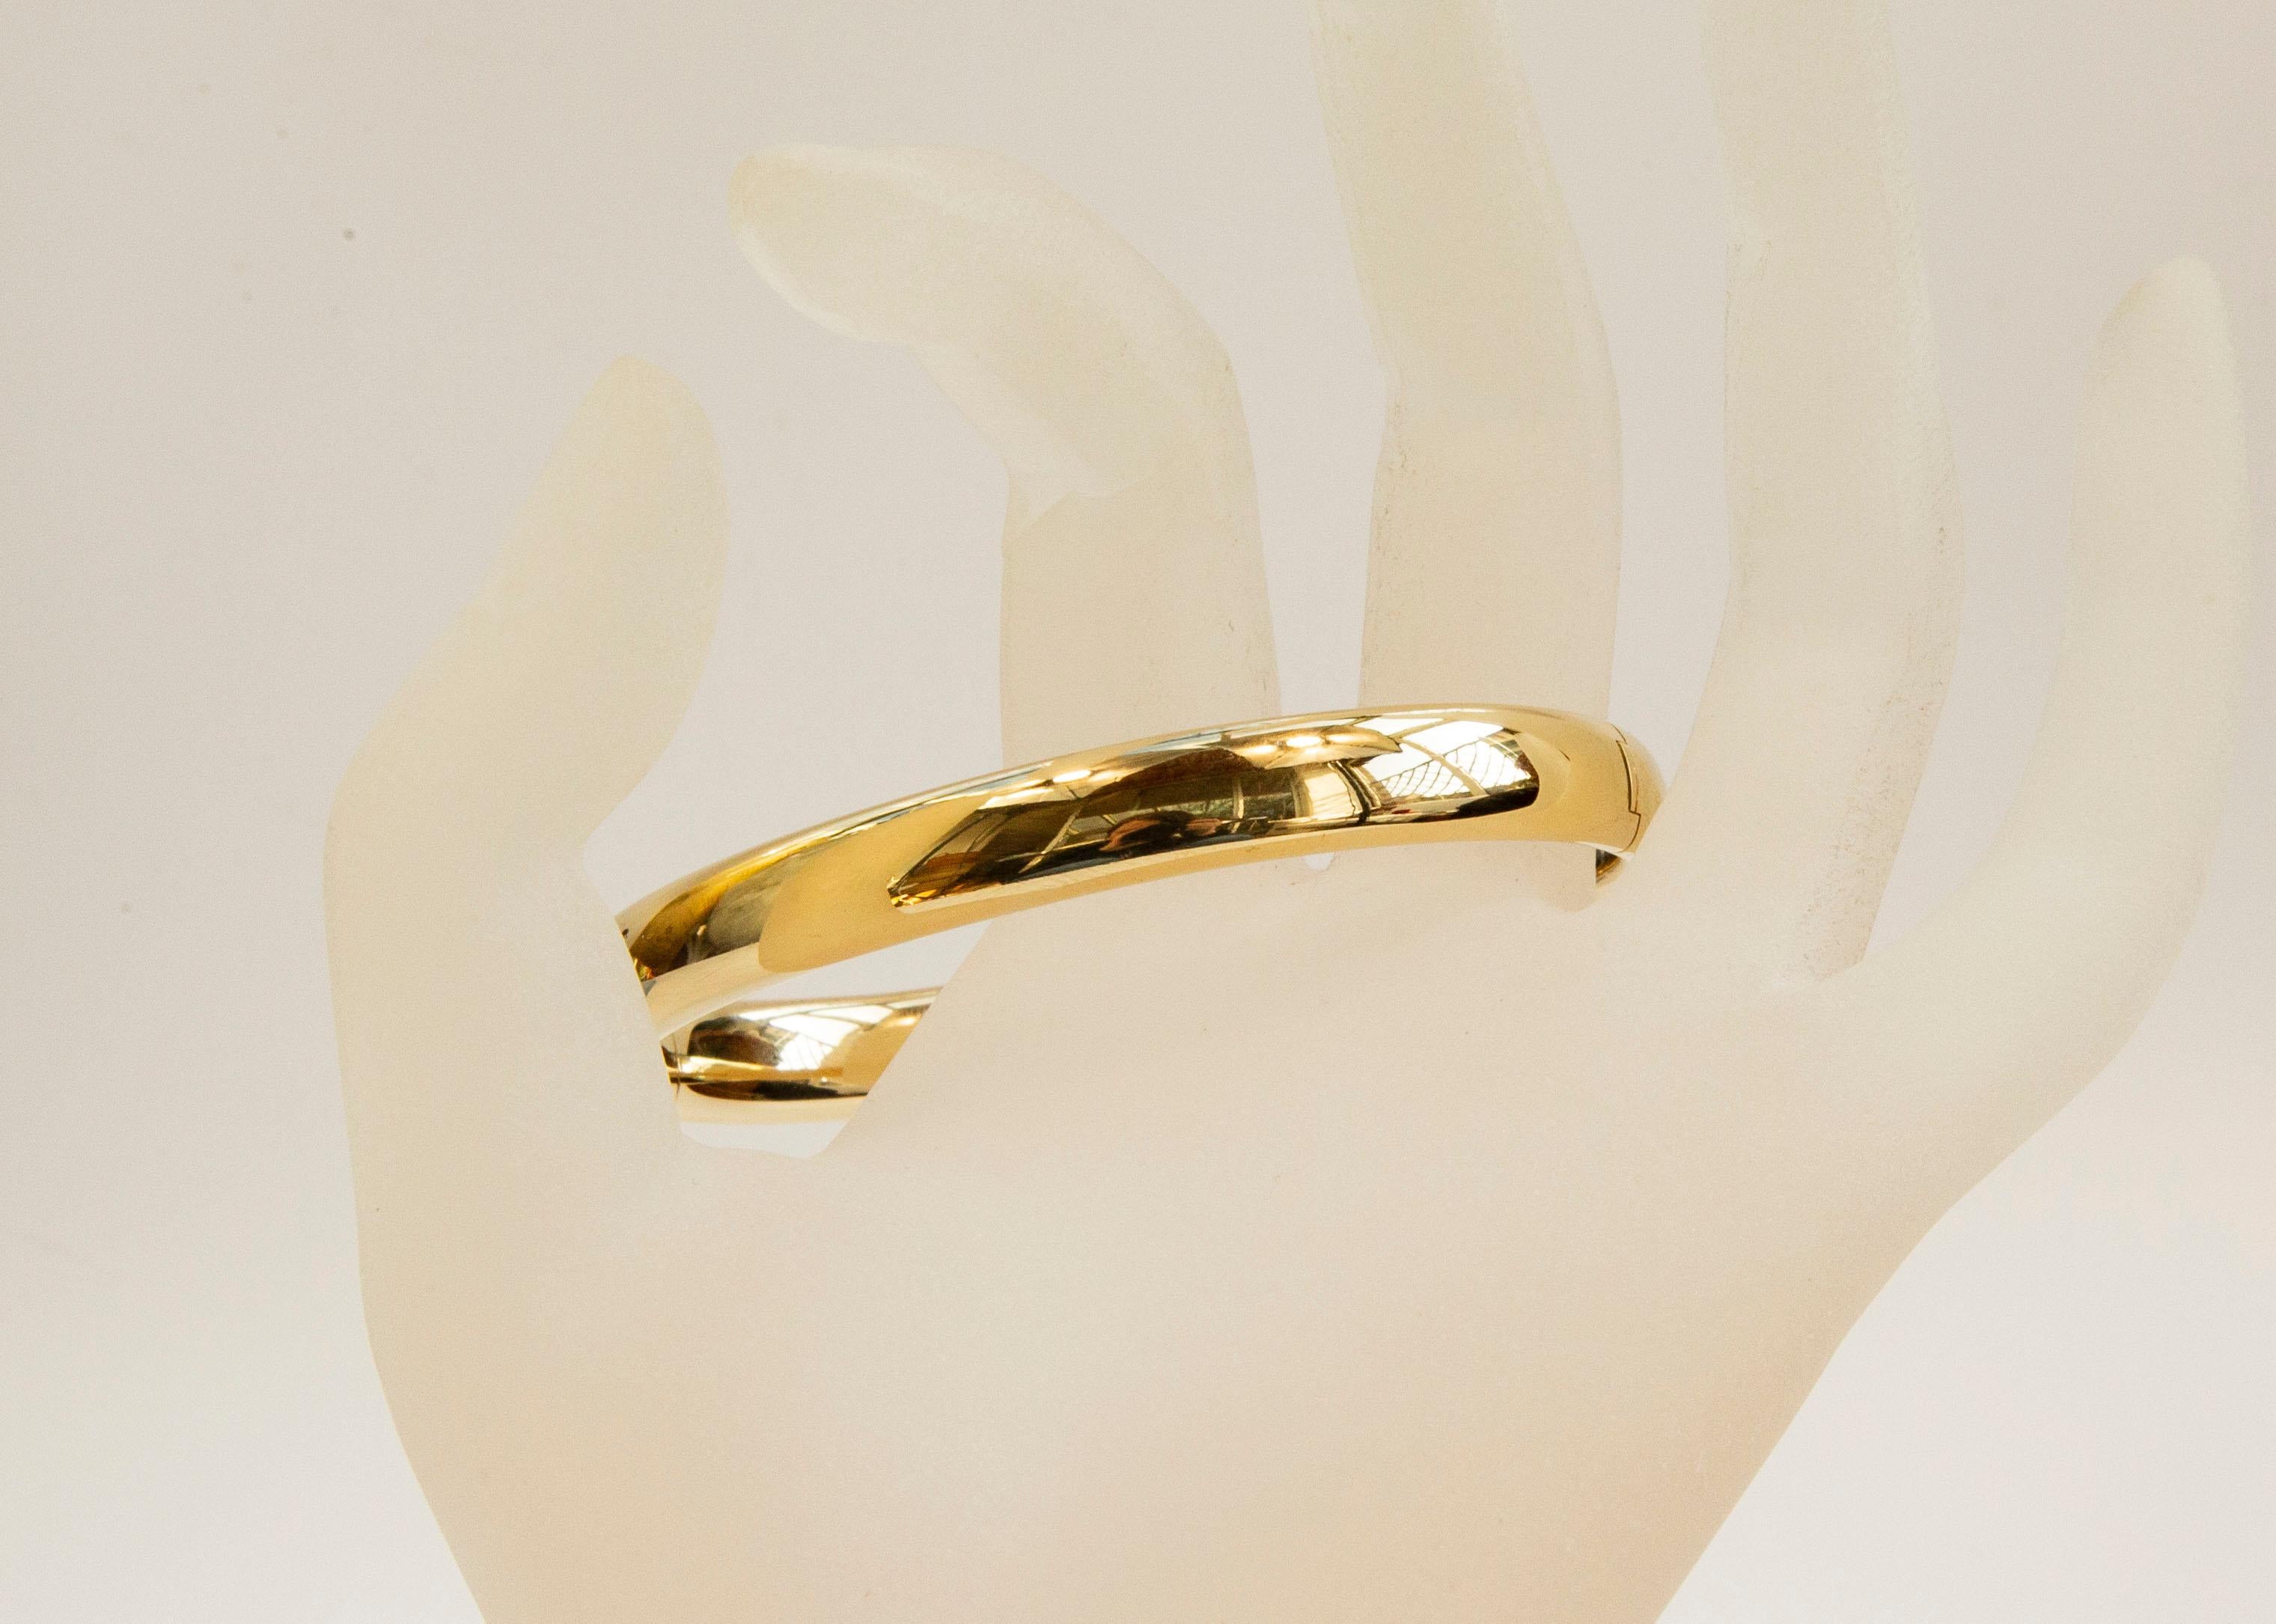 14 Karat Solid Yellow Gold Hinged Bangle Rigid Bracelet with Box Clasp In Good Condition For Sale In Arnhem, NL